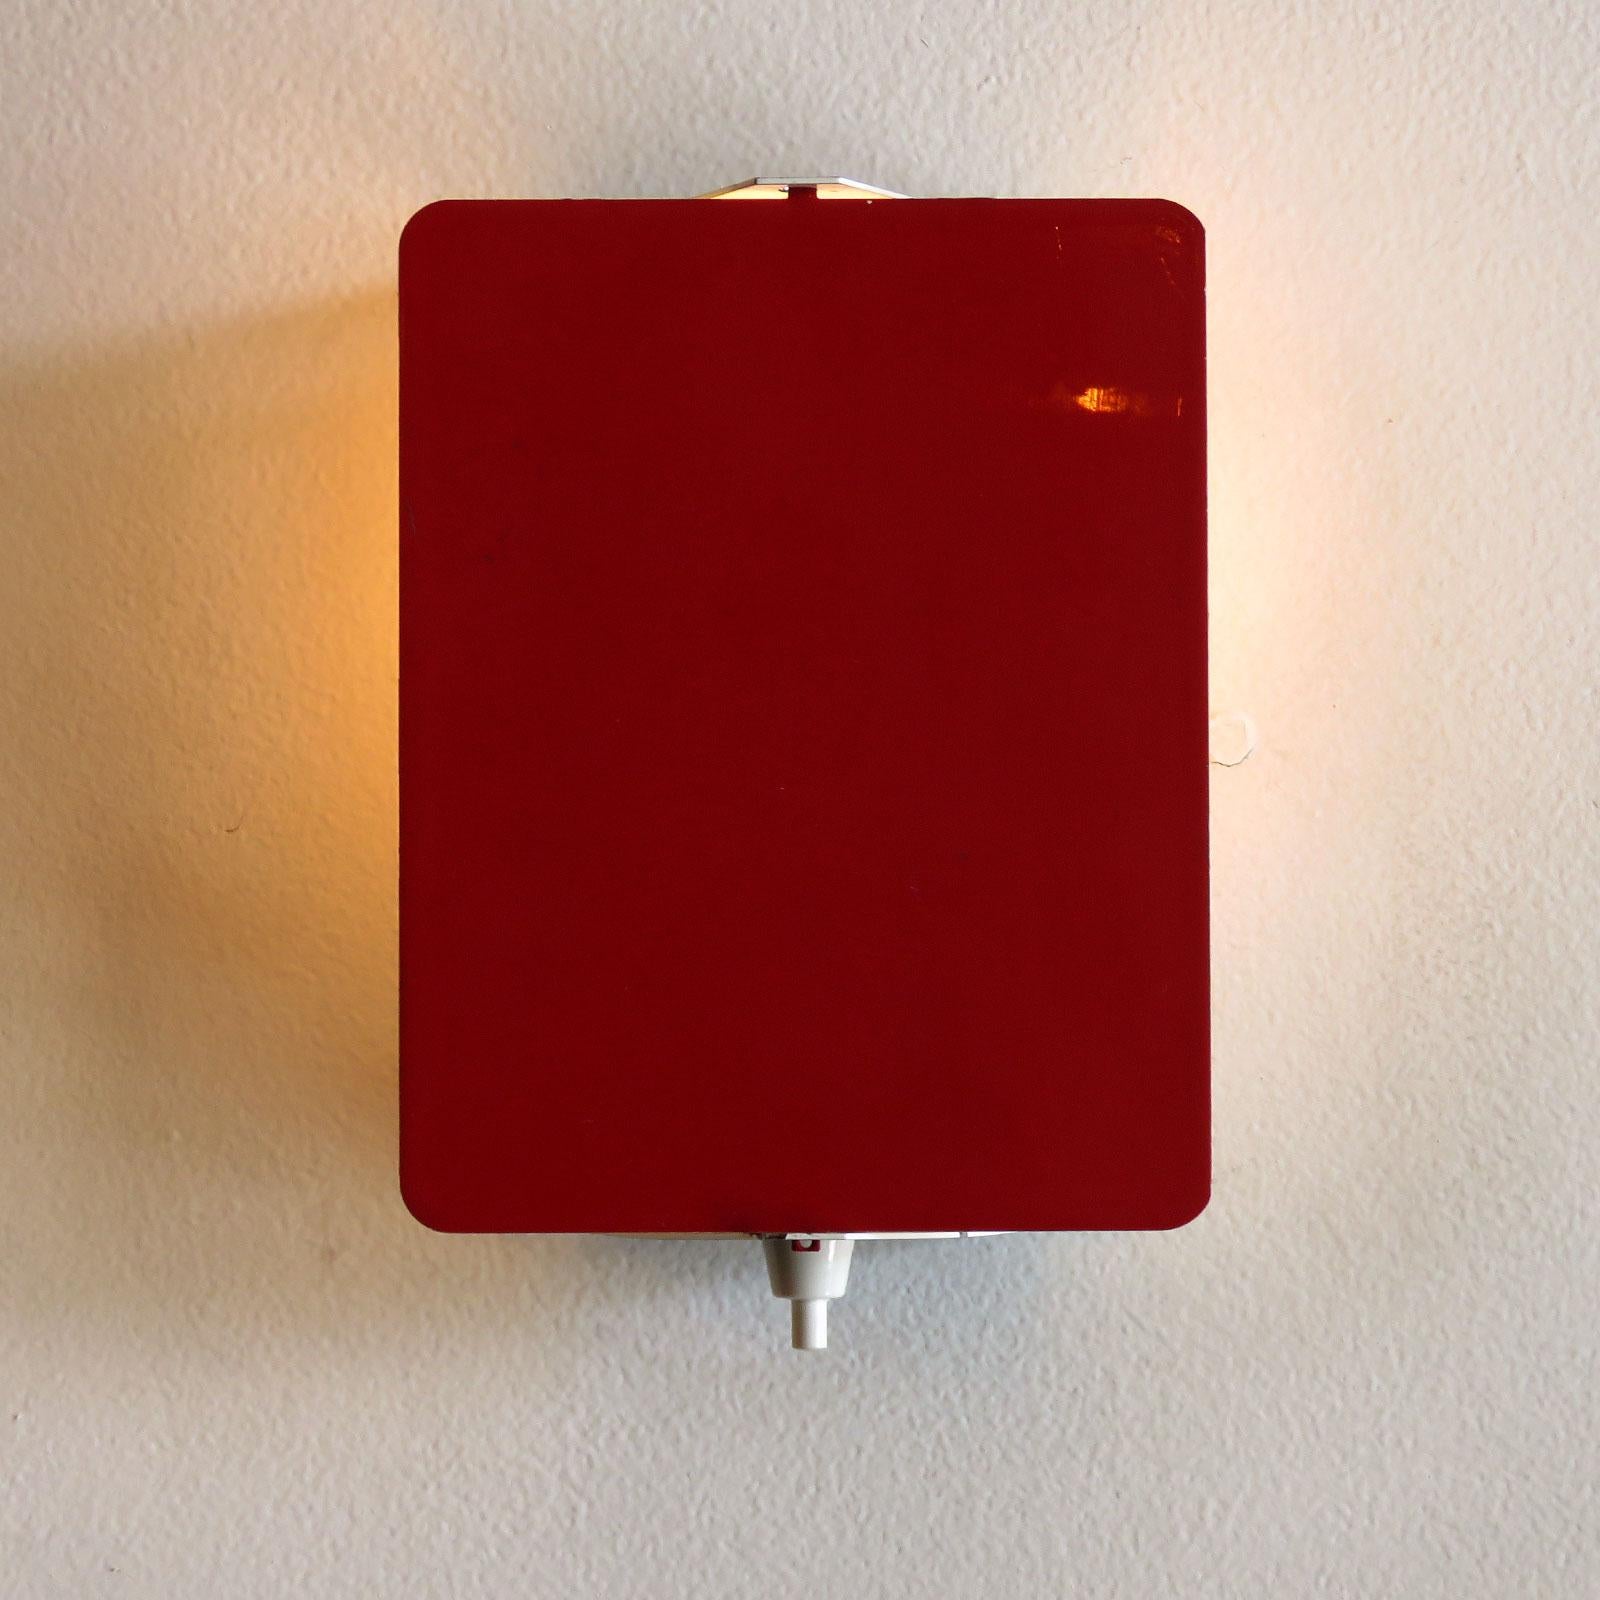 Red CP-1 Wall Lights by Charlotte Perriand, 1960 For Sale 1